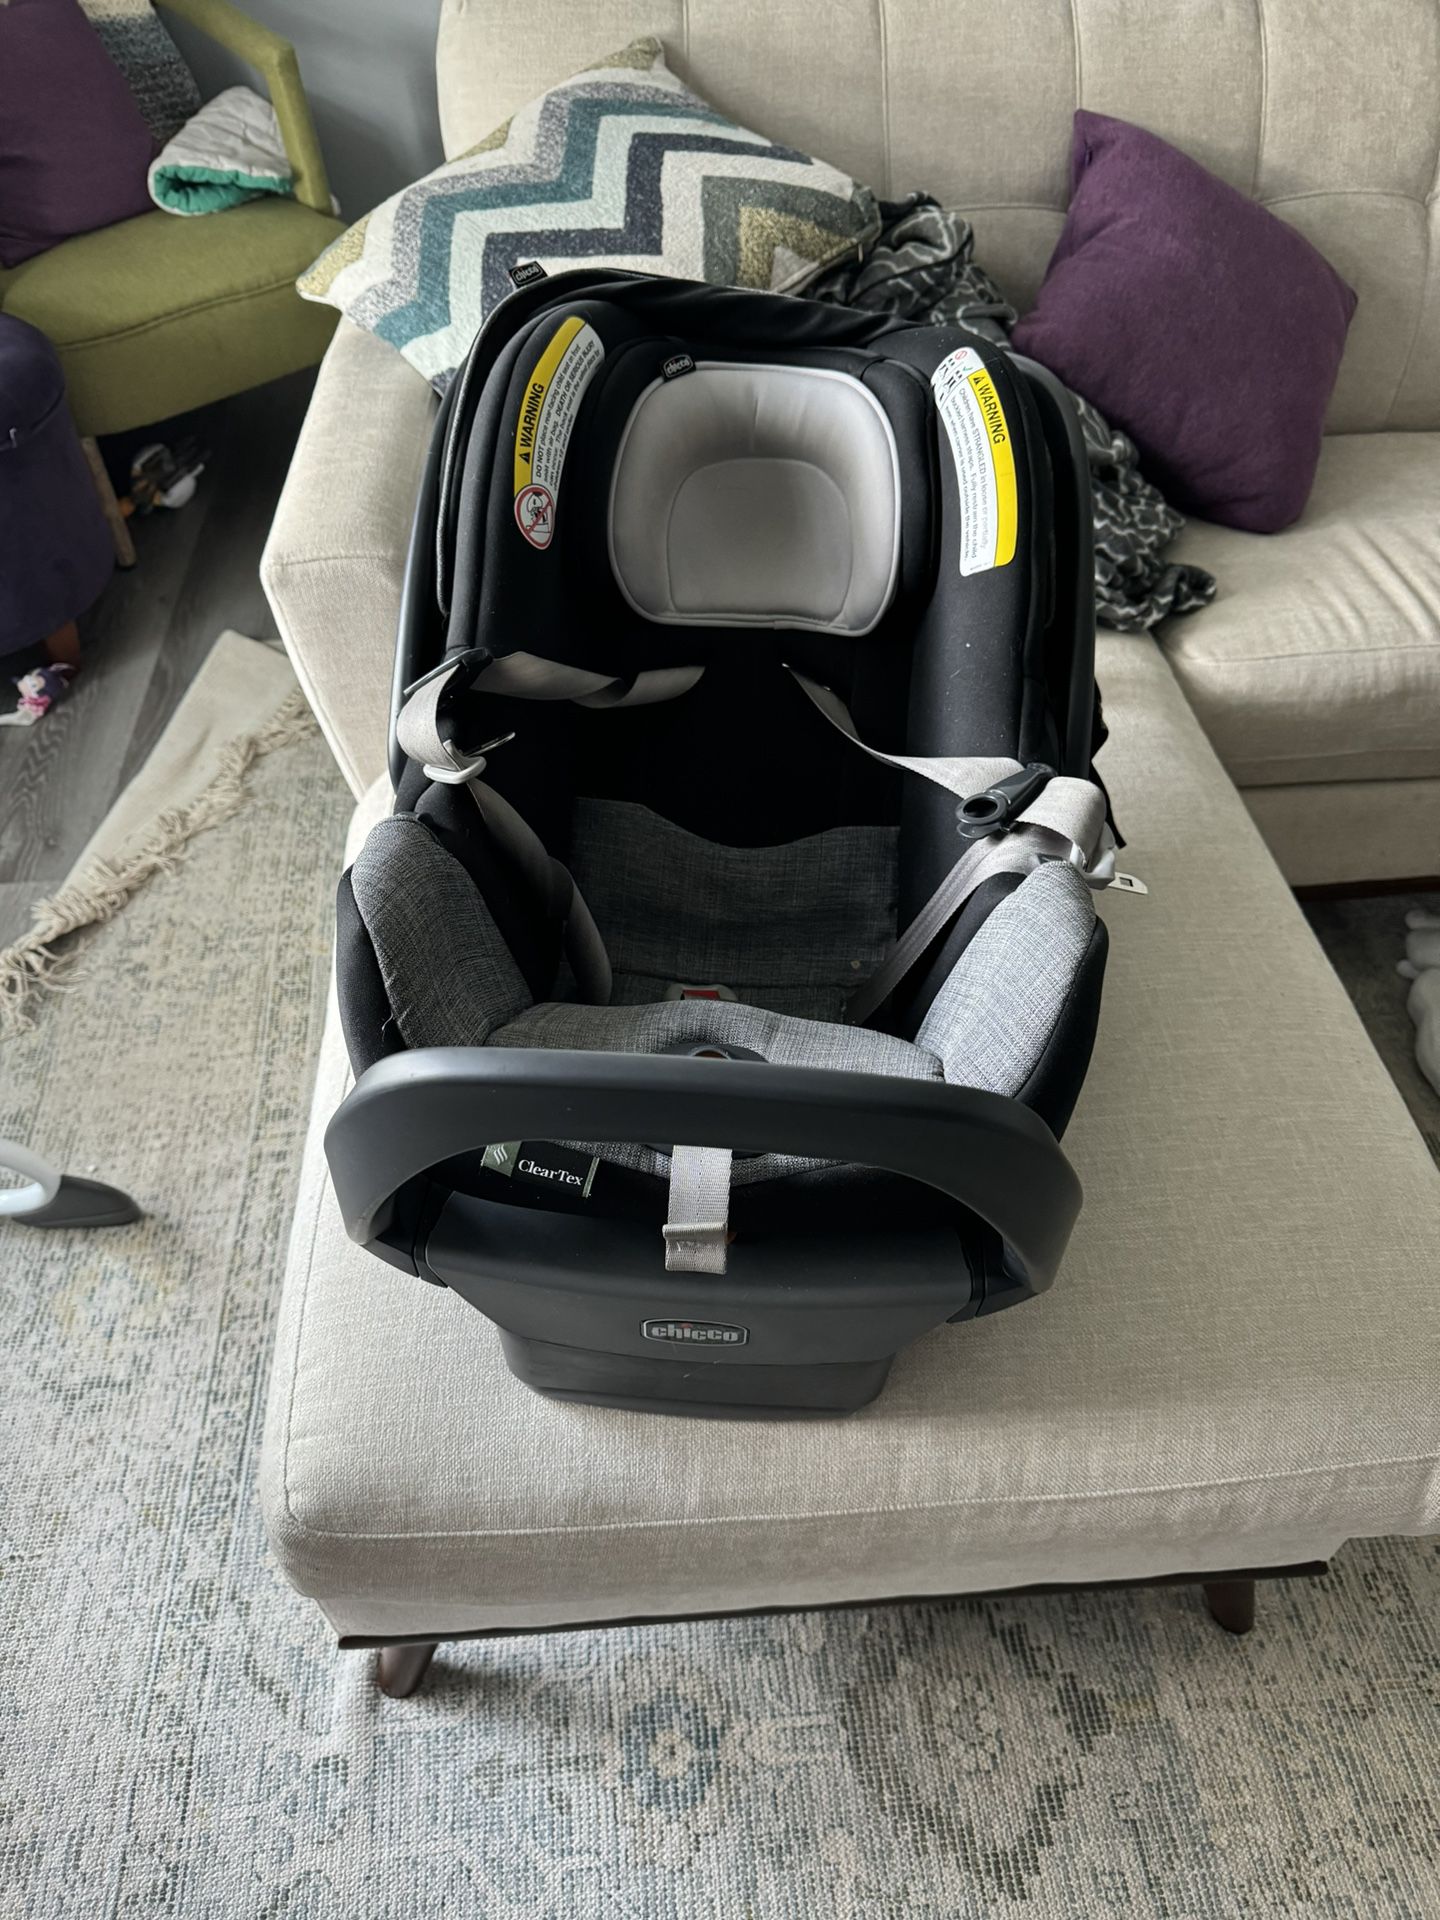 Chico Keyfit 35 With Car Seat base And Chico Corso Stroller Adapter.